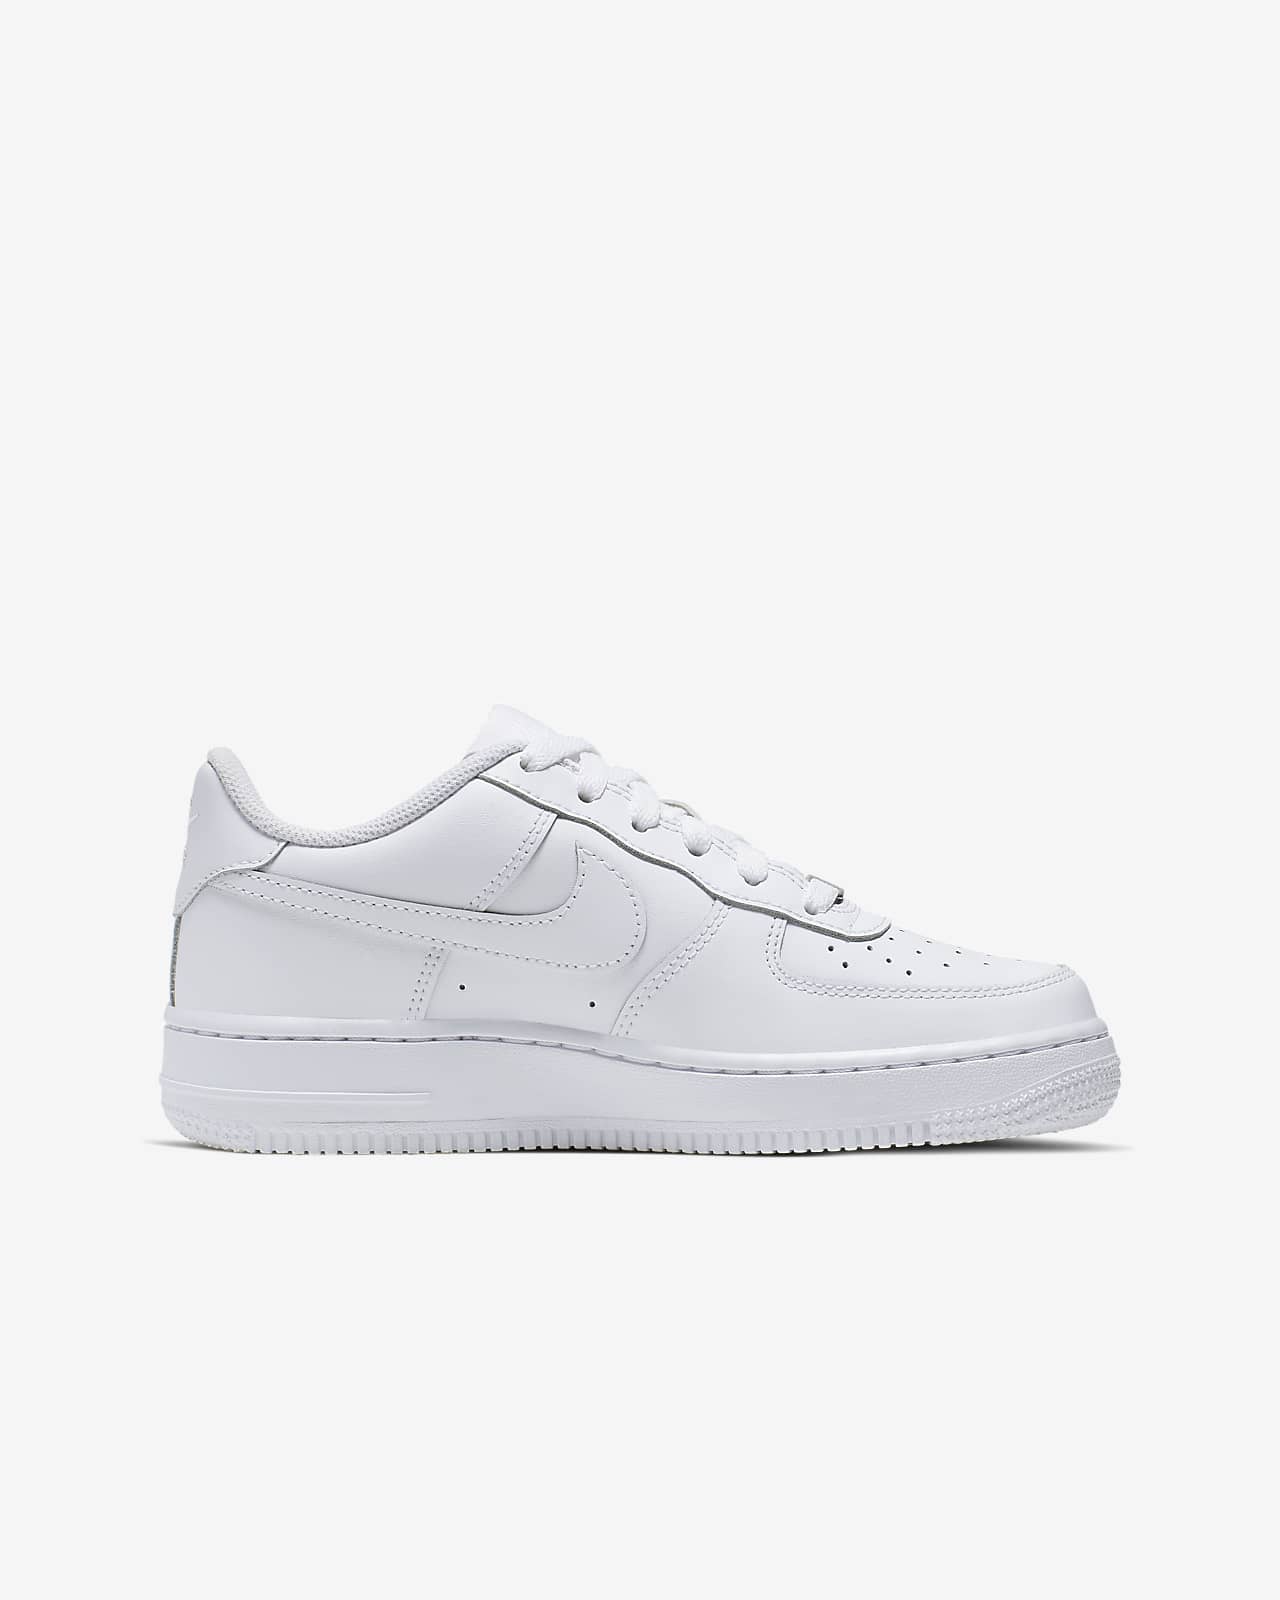 nike air force 1 size 4y